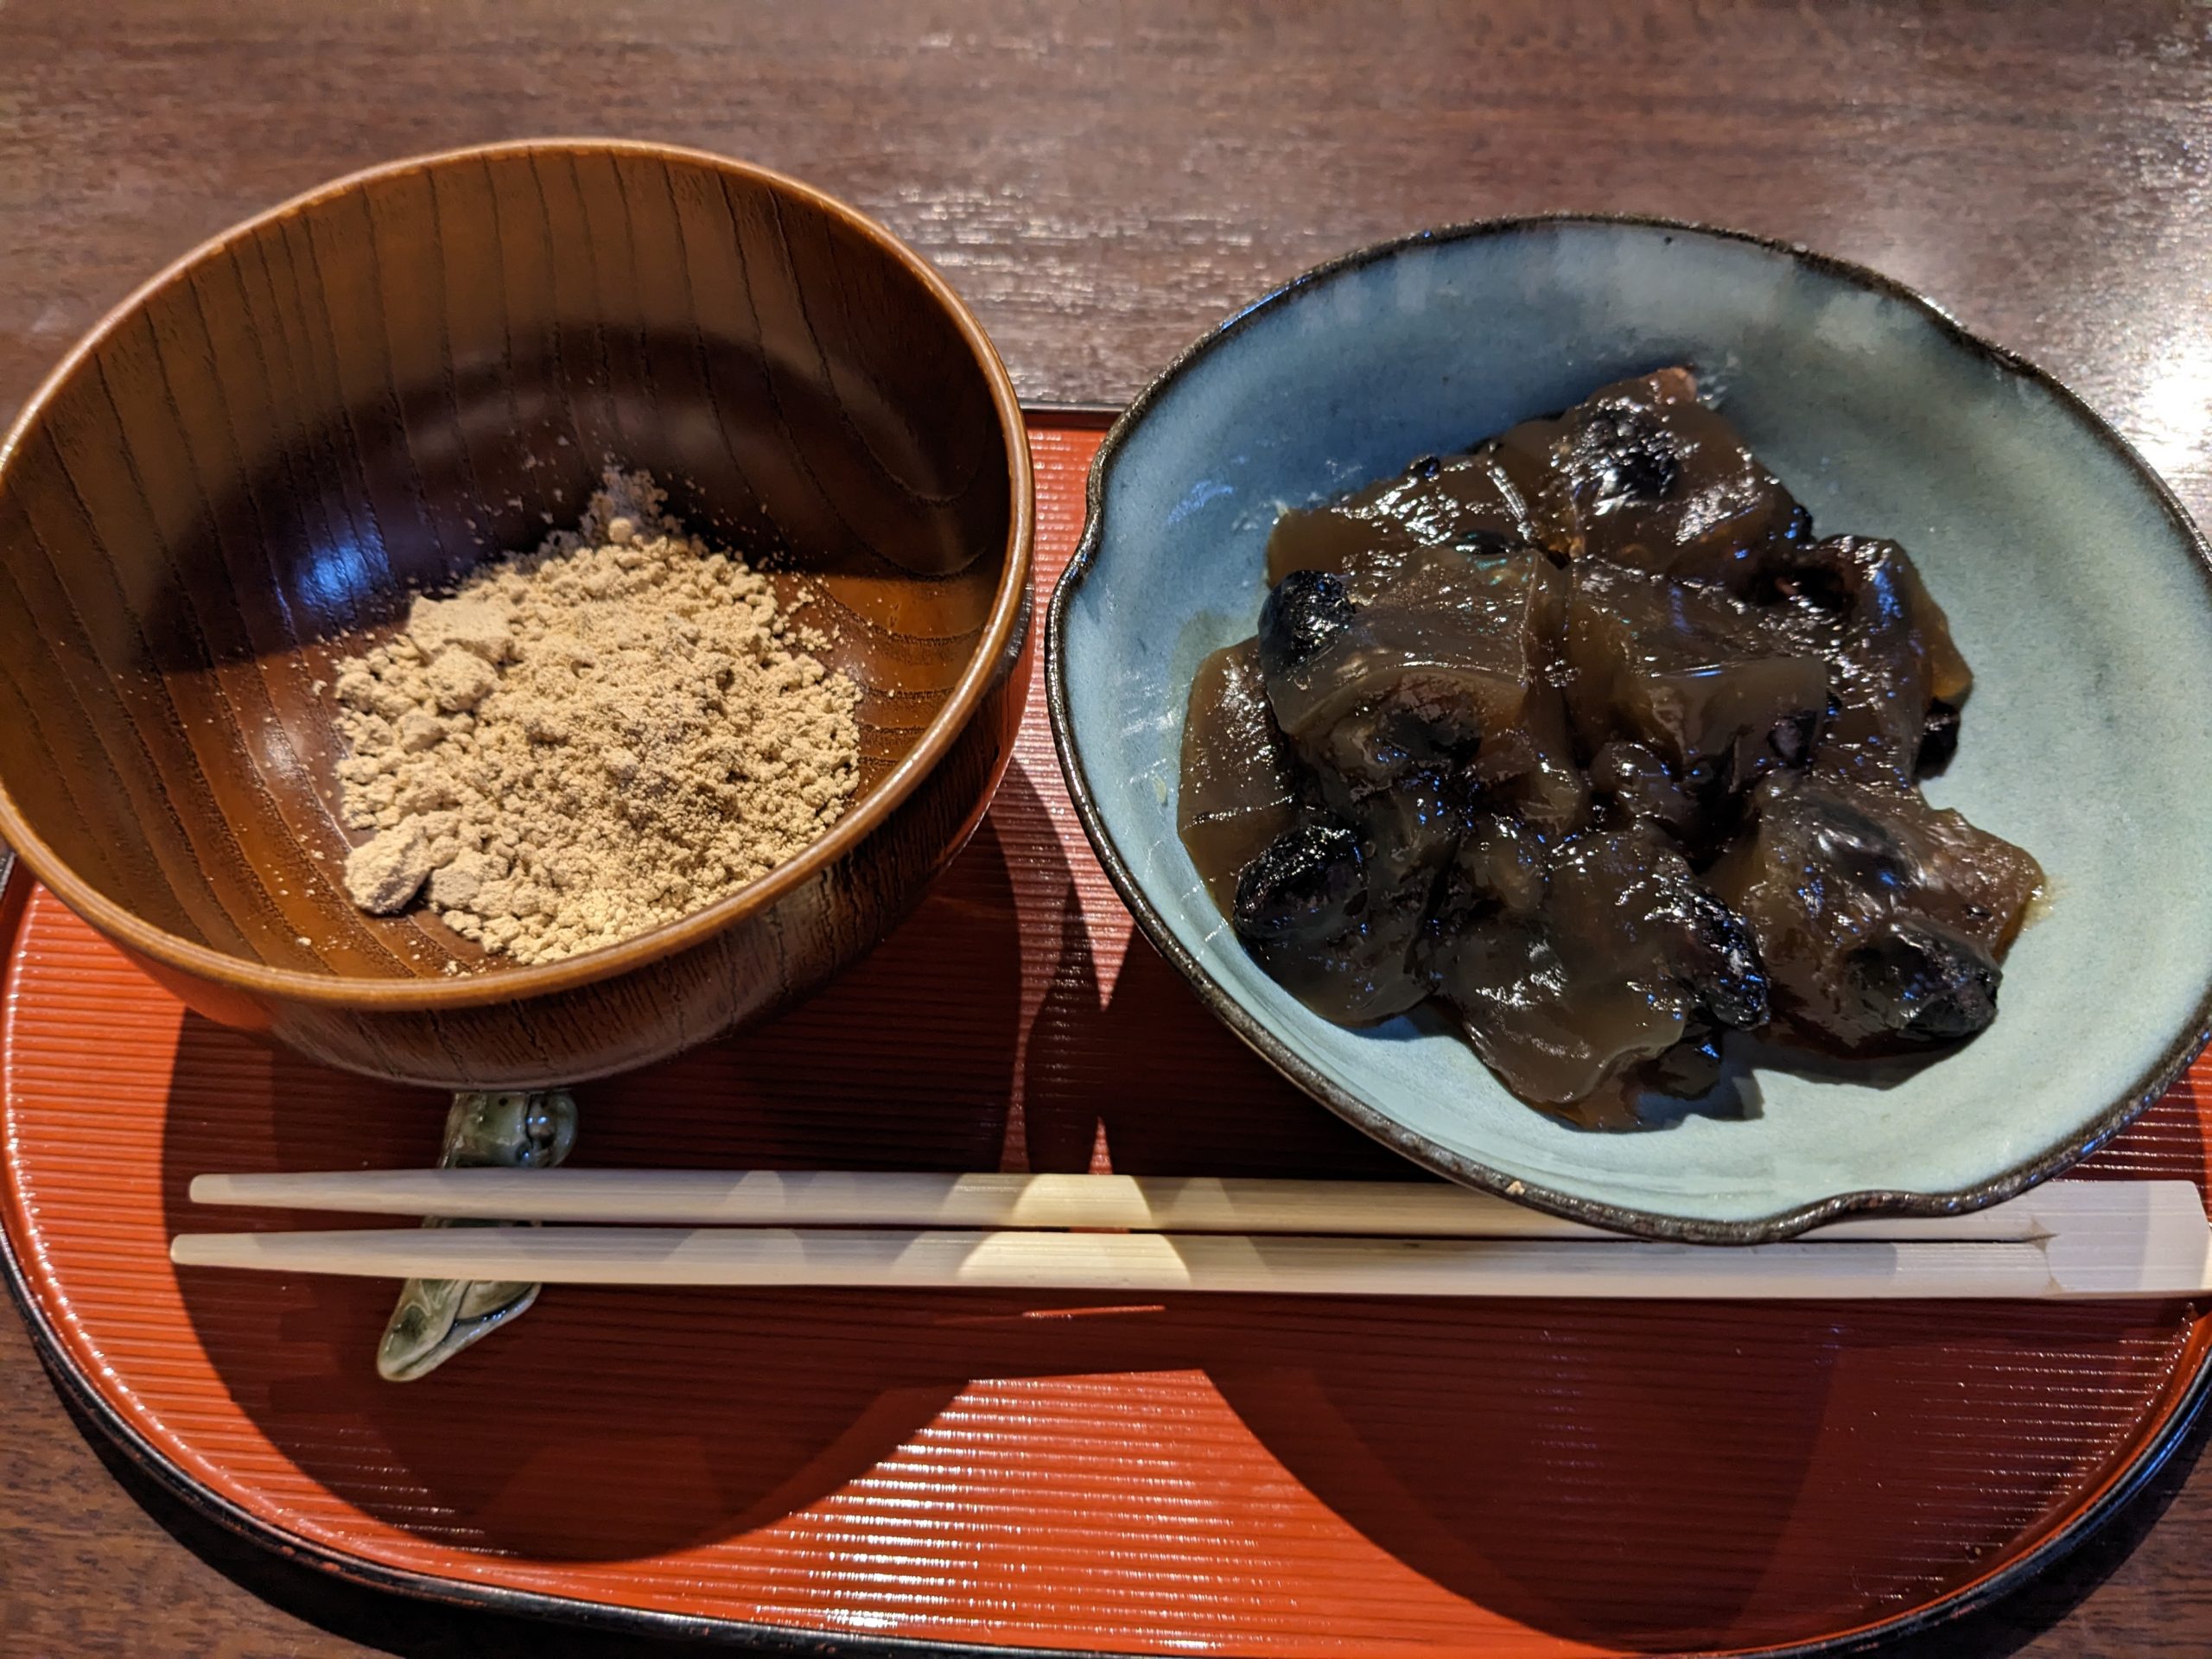 Warabi mochi in a blue bowl. Next to the blue bowl is another bowl filled with kinoko powder.